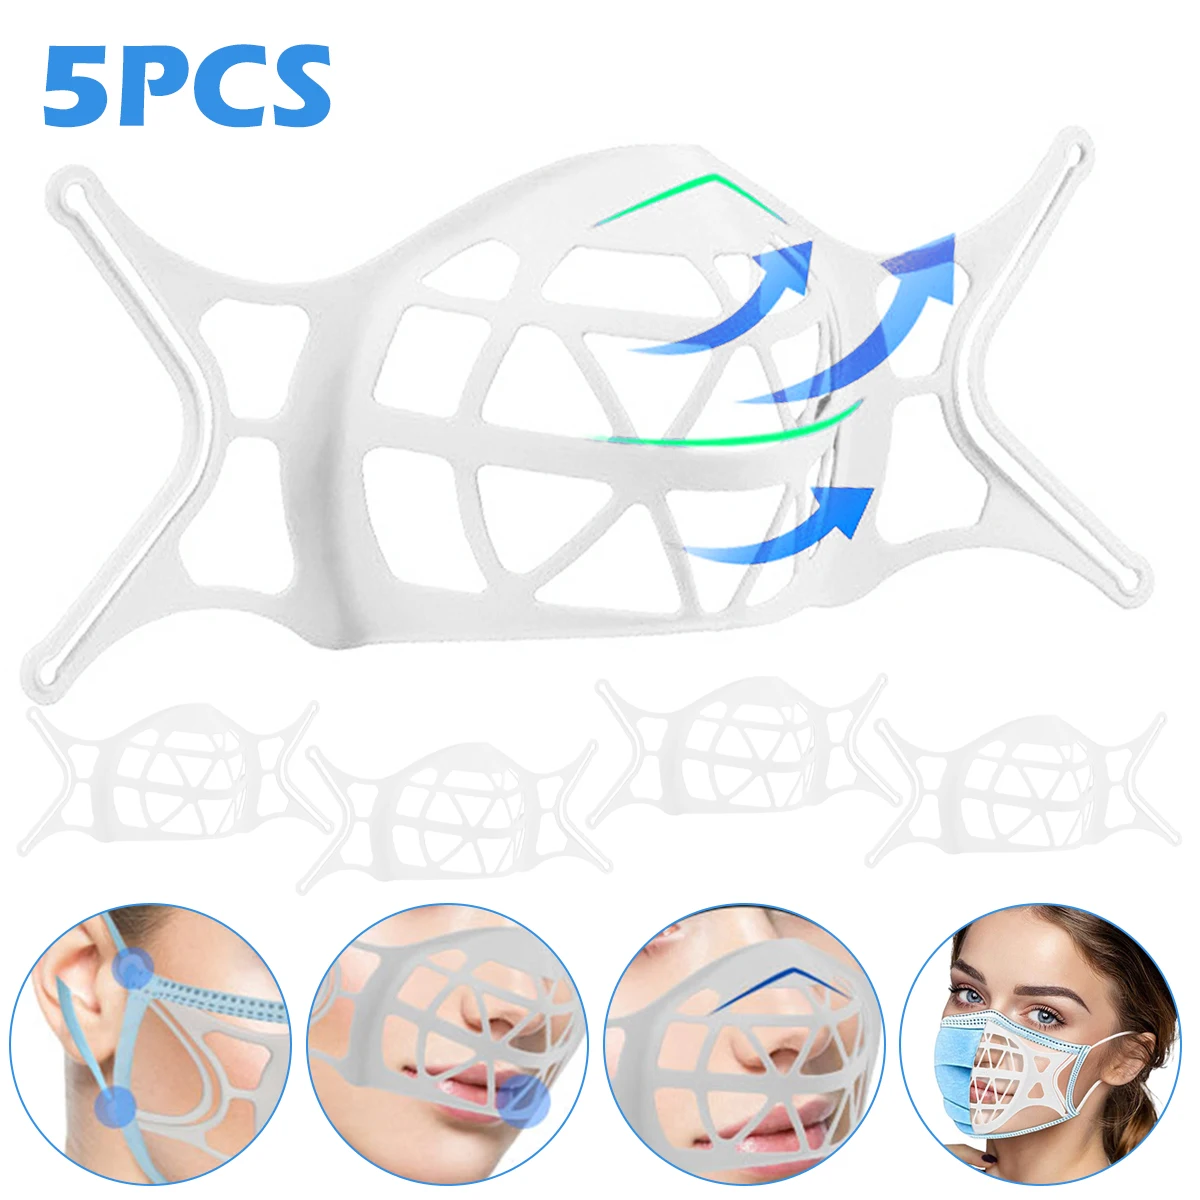 

5Pcs 3D Mouth Mask Support Breathing Assist Help Mask Inner Cushion Bracket Food Grade Silicone Mask Holder Breathable Valve